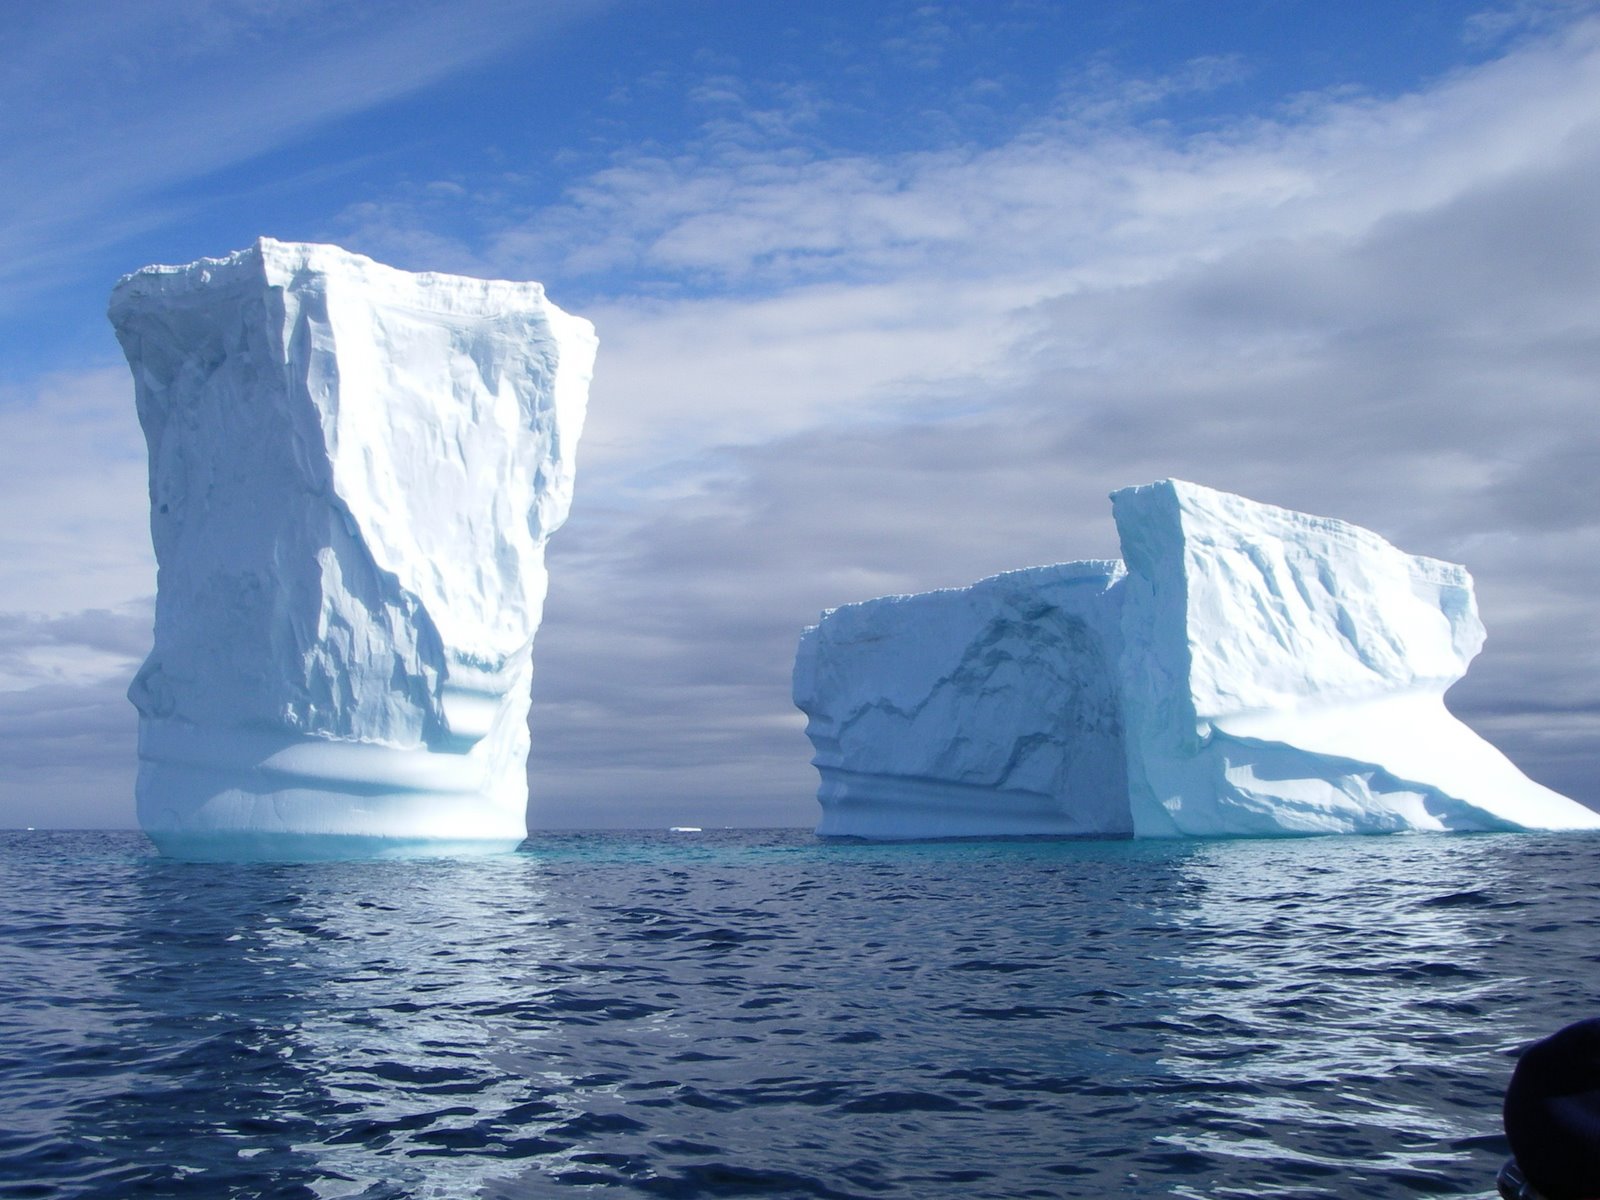 icebergs | PicturesPool: Antartica Icebergs Wallpapers pictures ...